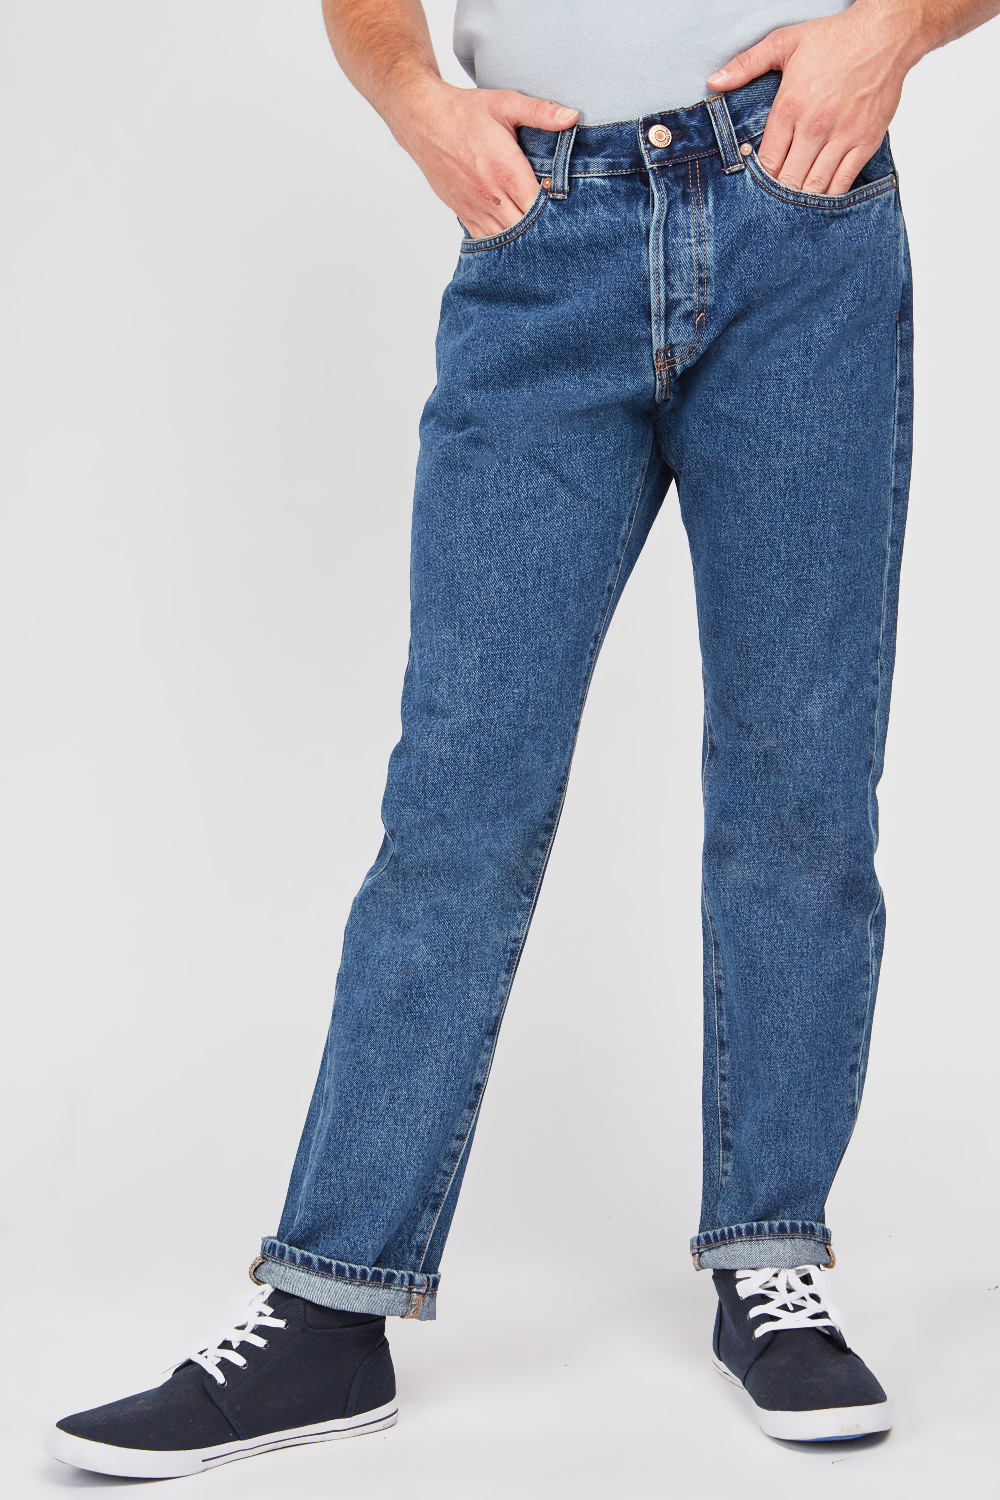 Low Waist Straight Fitted Jeans - Just $7